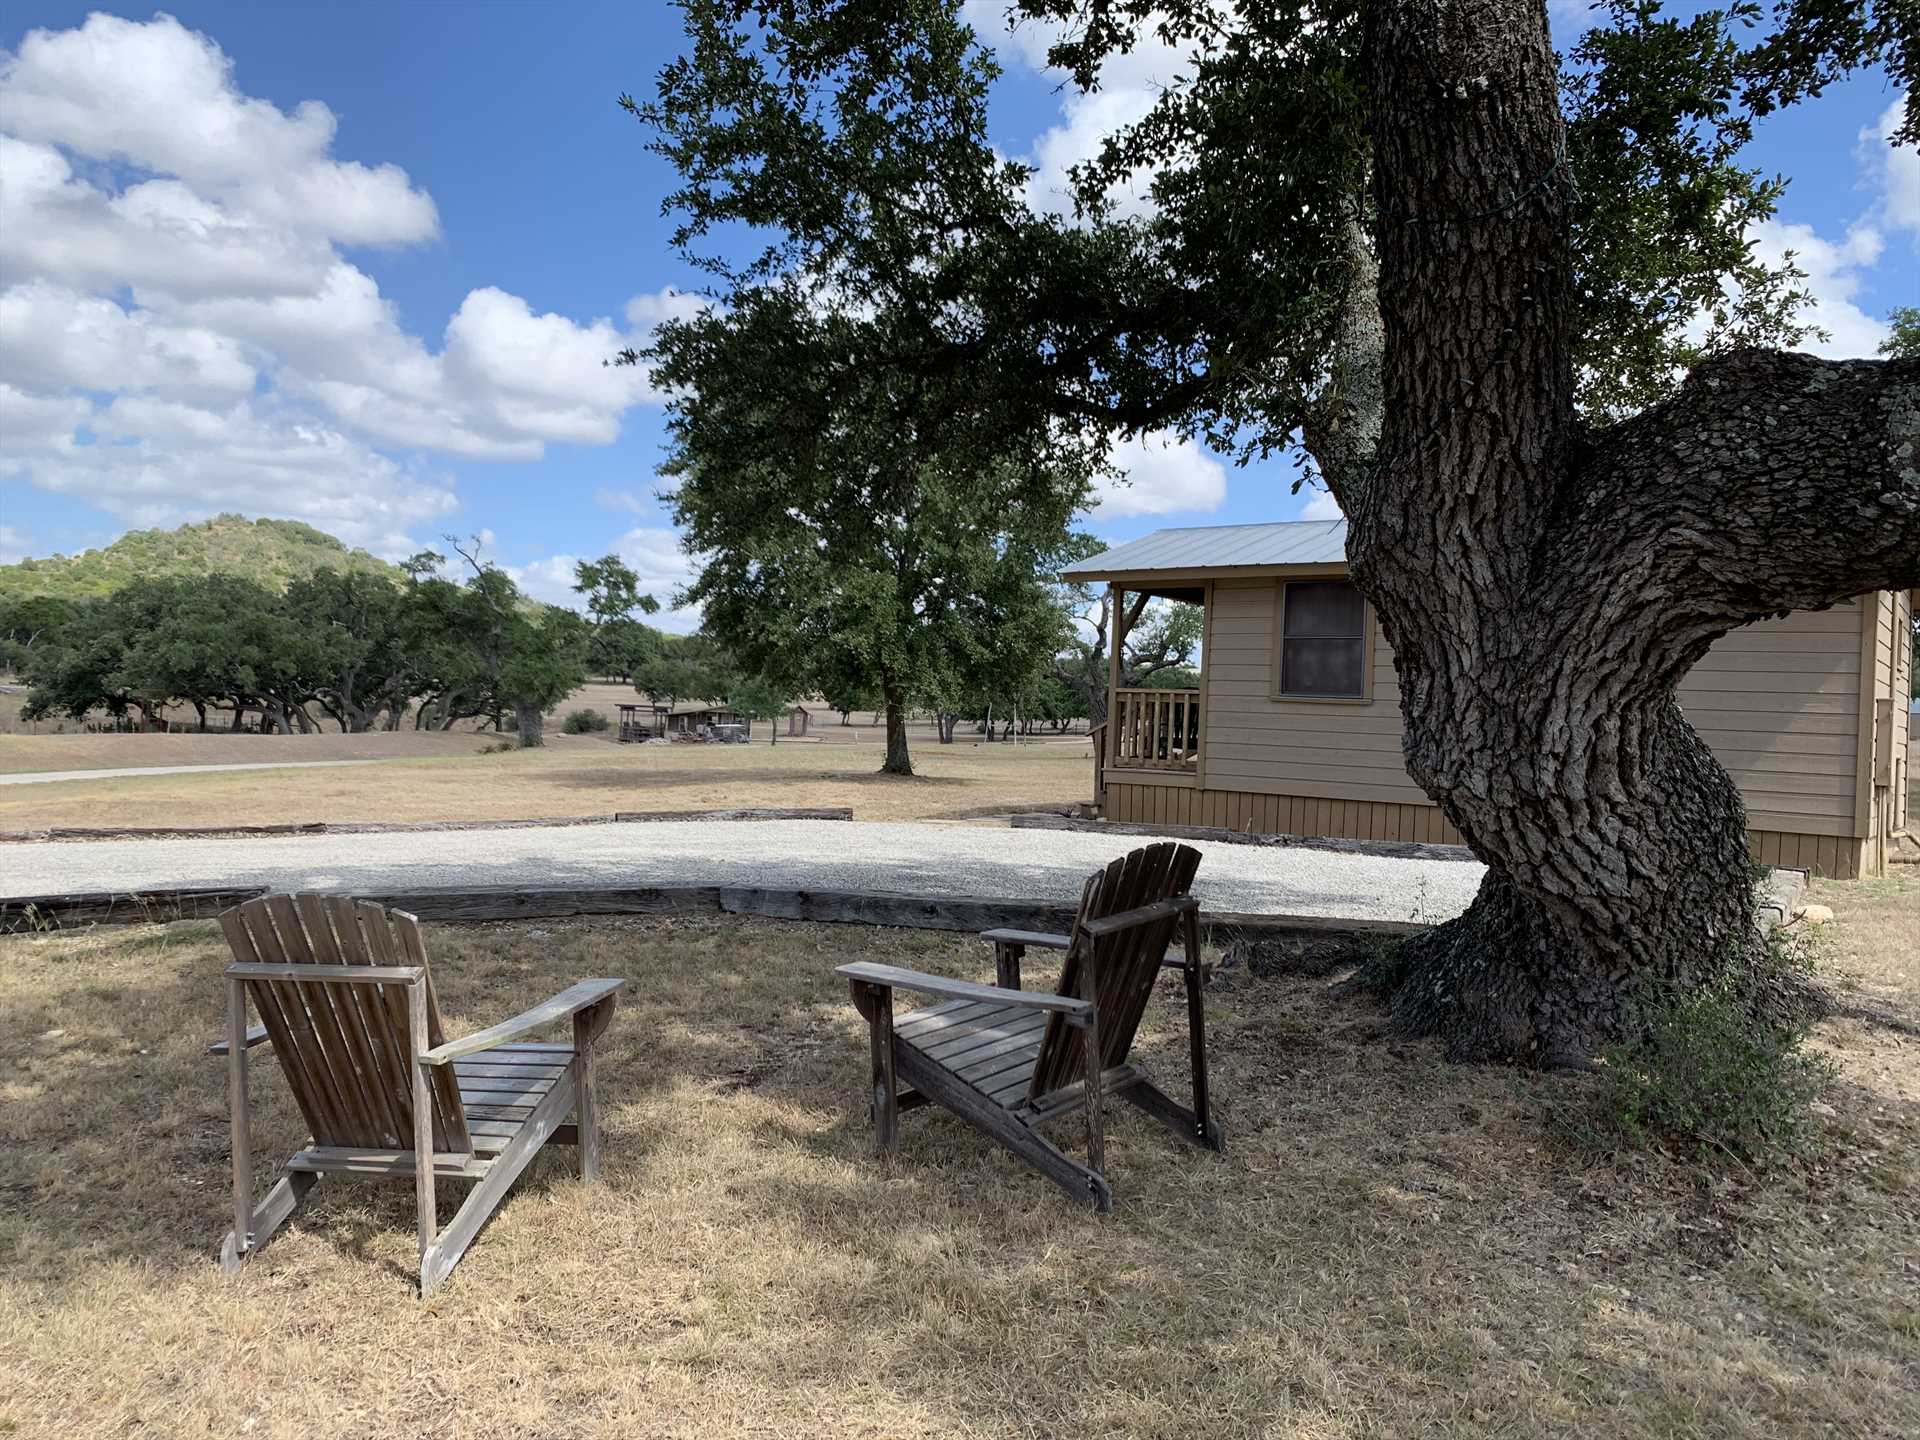                                                 Have yourself a relaxing sit-down under the shady oak in the comfy Adirondack chairs, and savor the Hill Country views and fresh air!